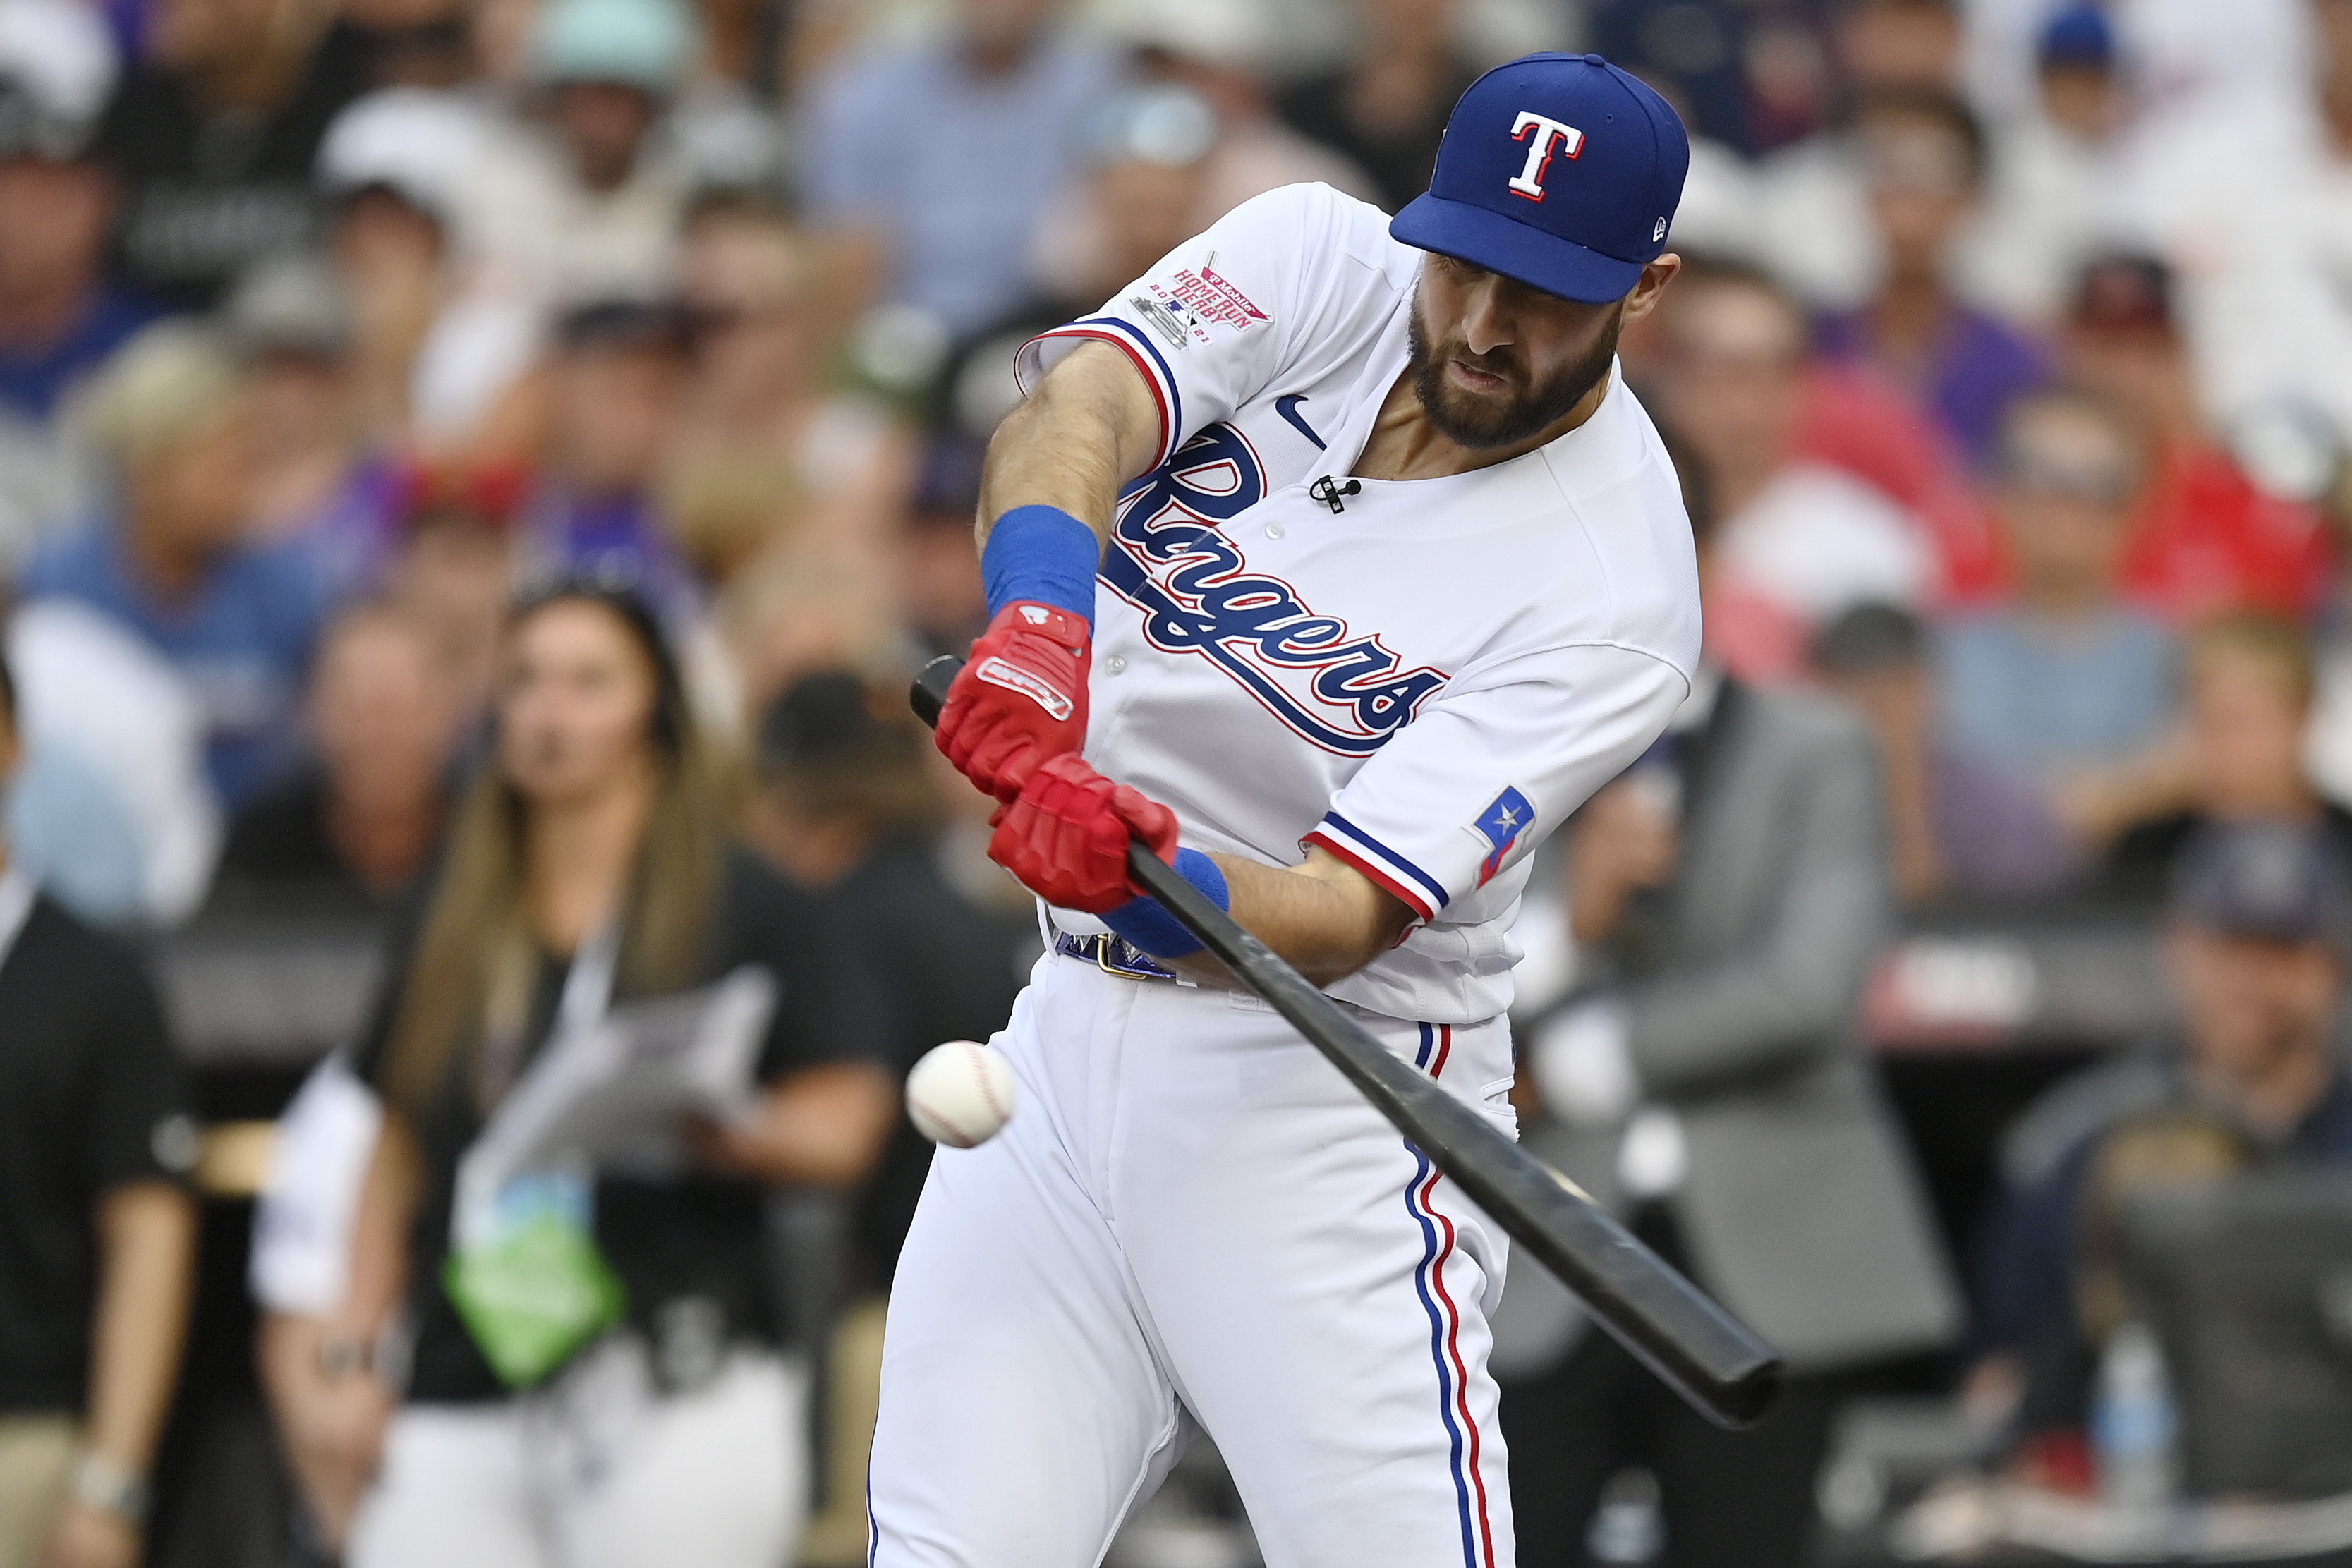 This is a 2021 photo of Joey Gallo of the Texas Rangers baseball